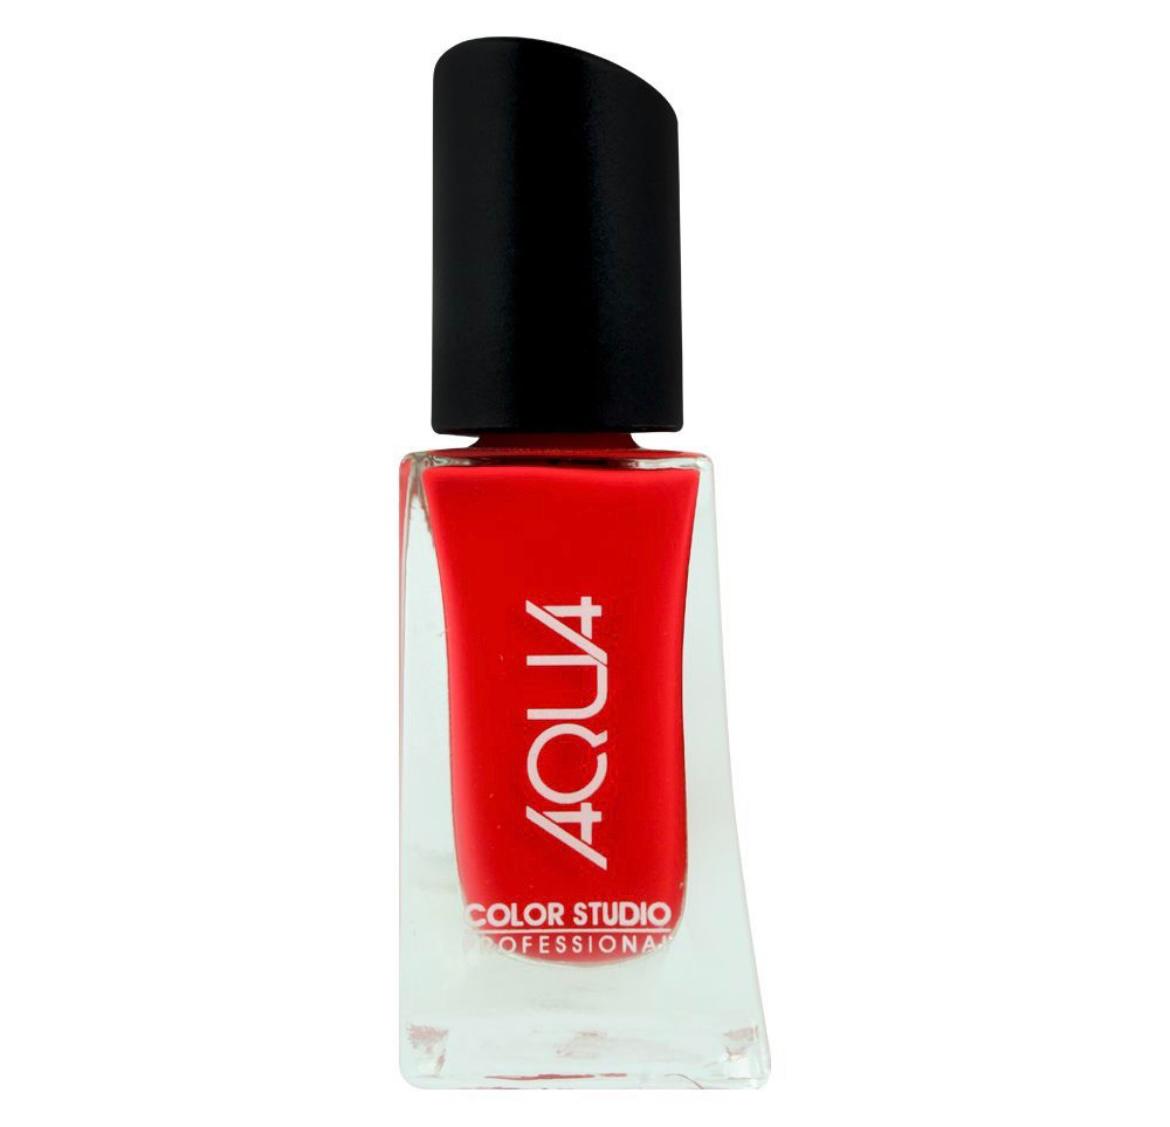 Chambor Colour Studio Le Select Nail Enamel: Buy Chambor Colour Studio Le  Select Nail Enamel Online at Best Price in India | Nykaa